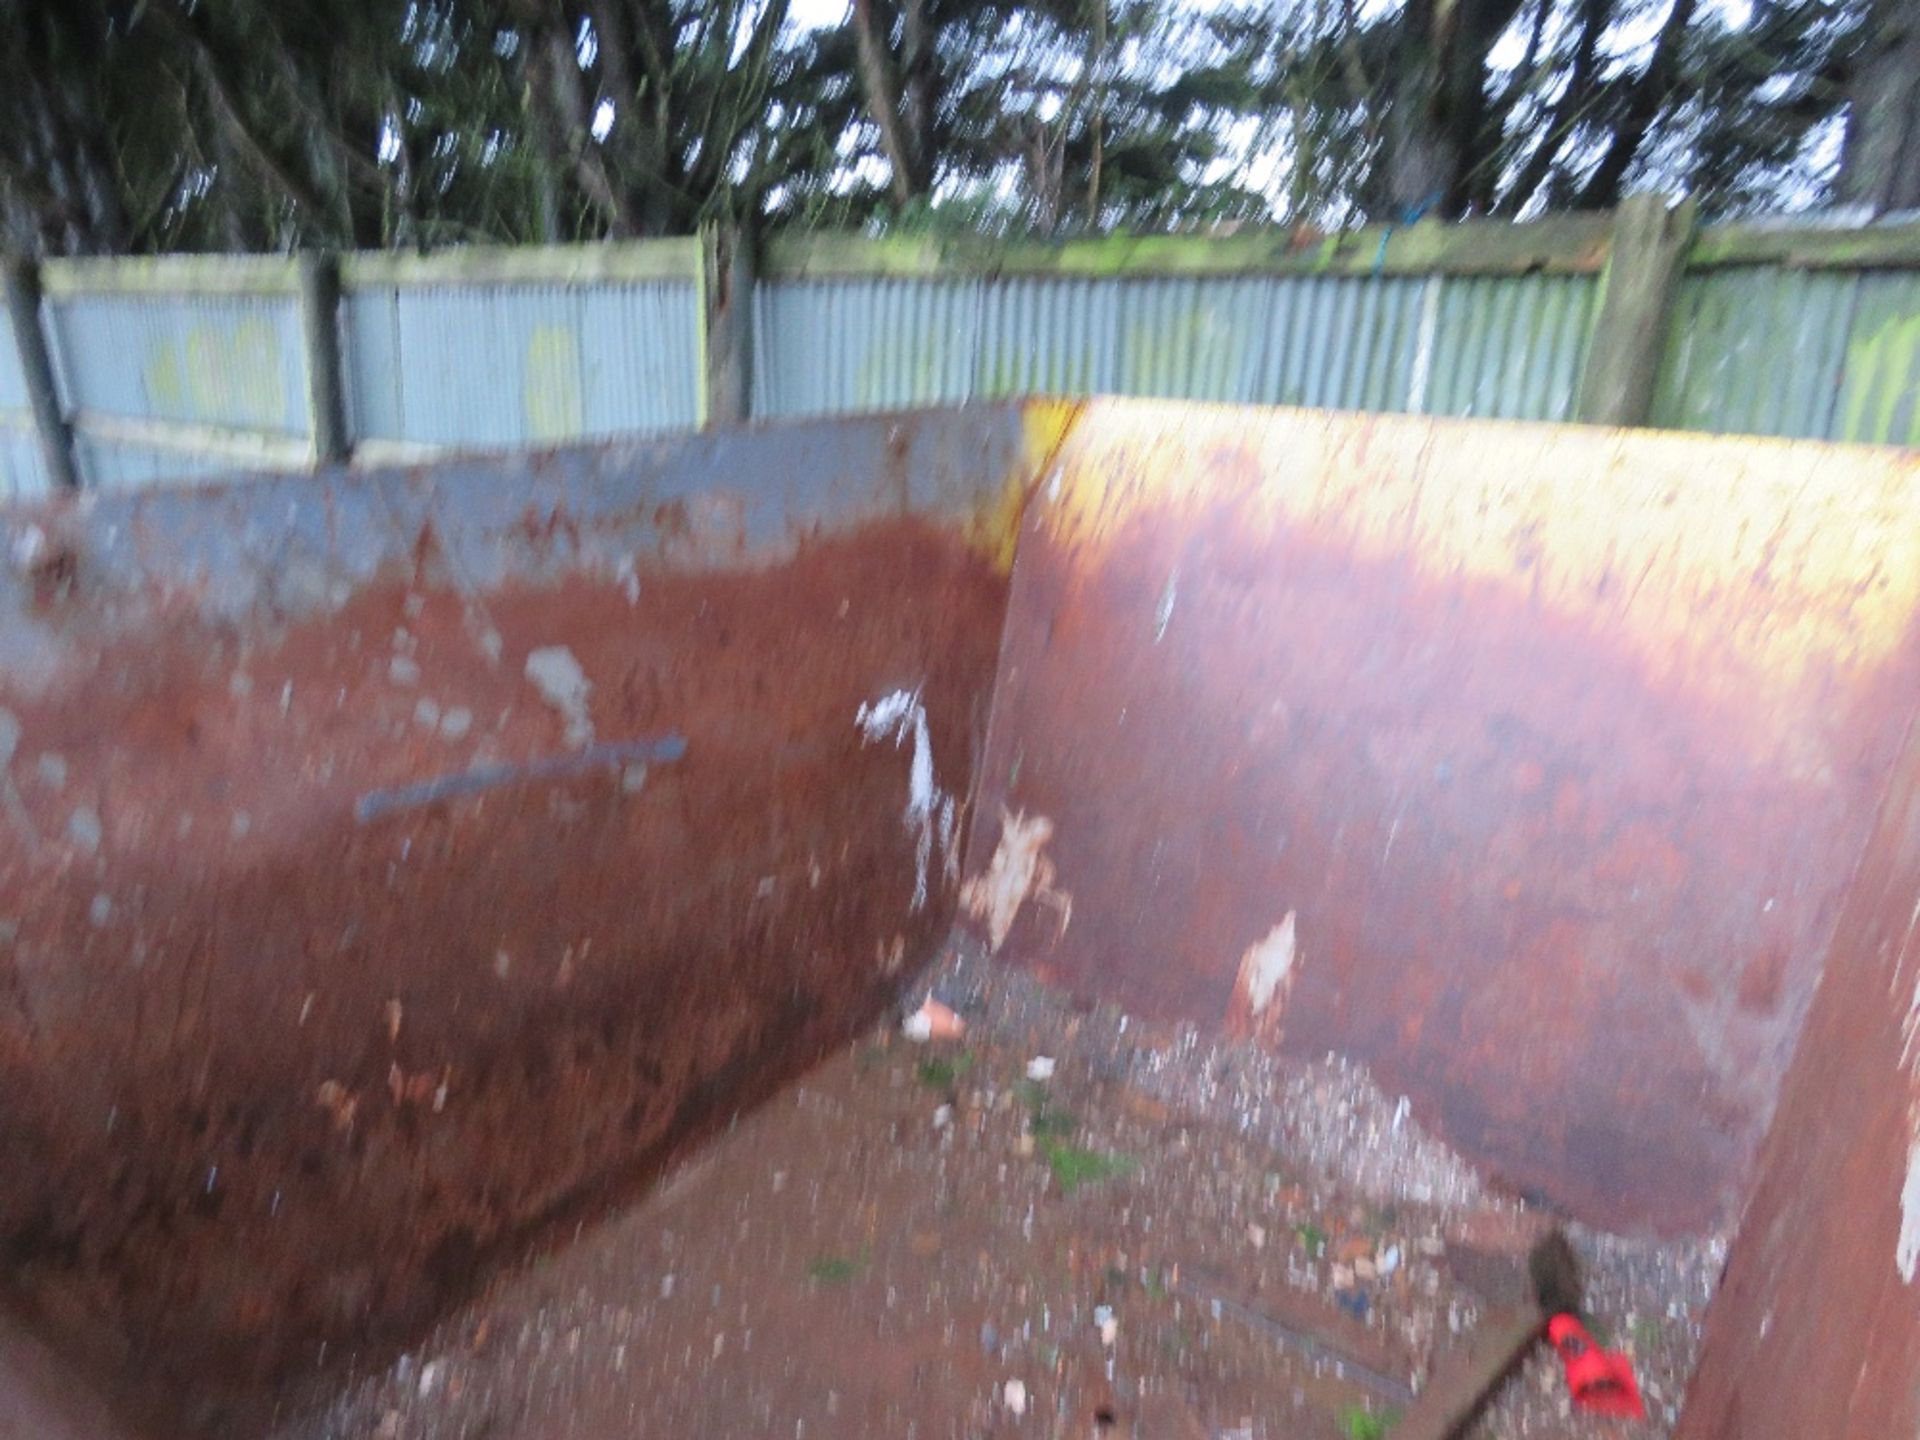 5 X CHAIN LIFT WASTE SKIPS, 2 YARD CAPACITY. DIRECT FROM LOCAL COMPANY WHO ARE DOWNSIZING. - Image 3 of 3